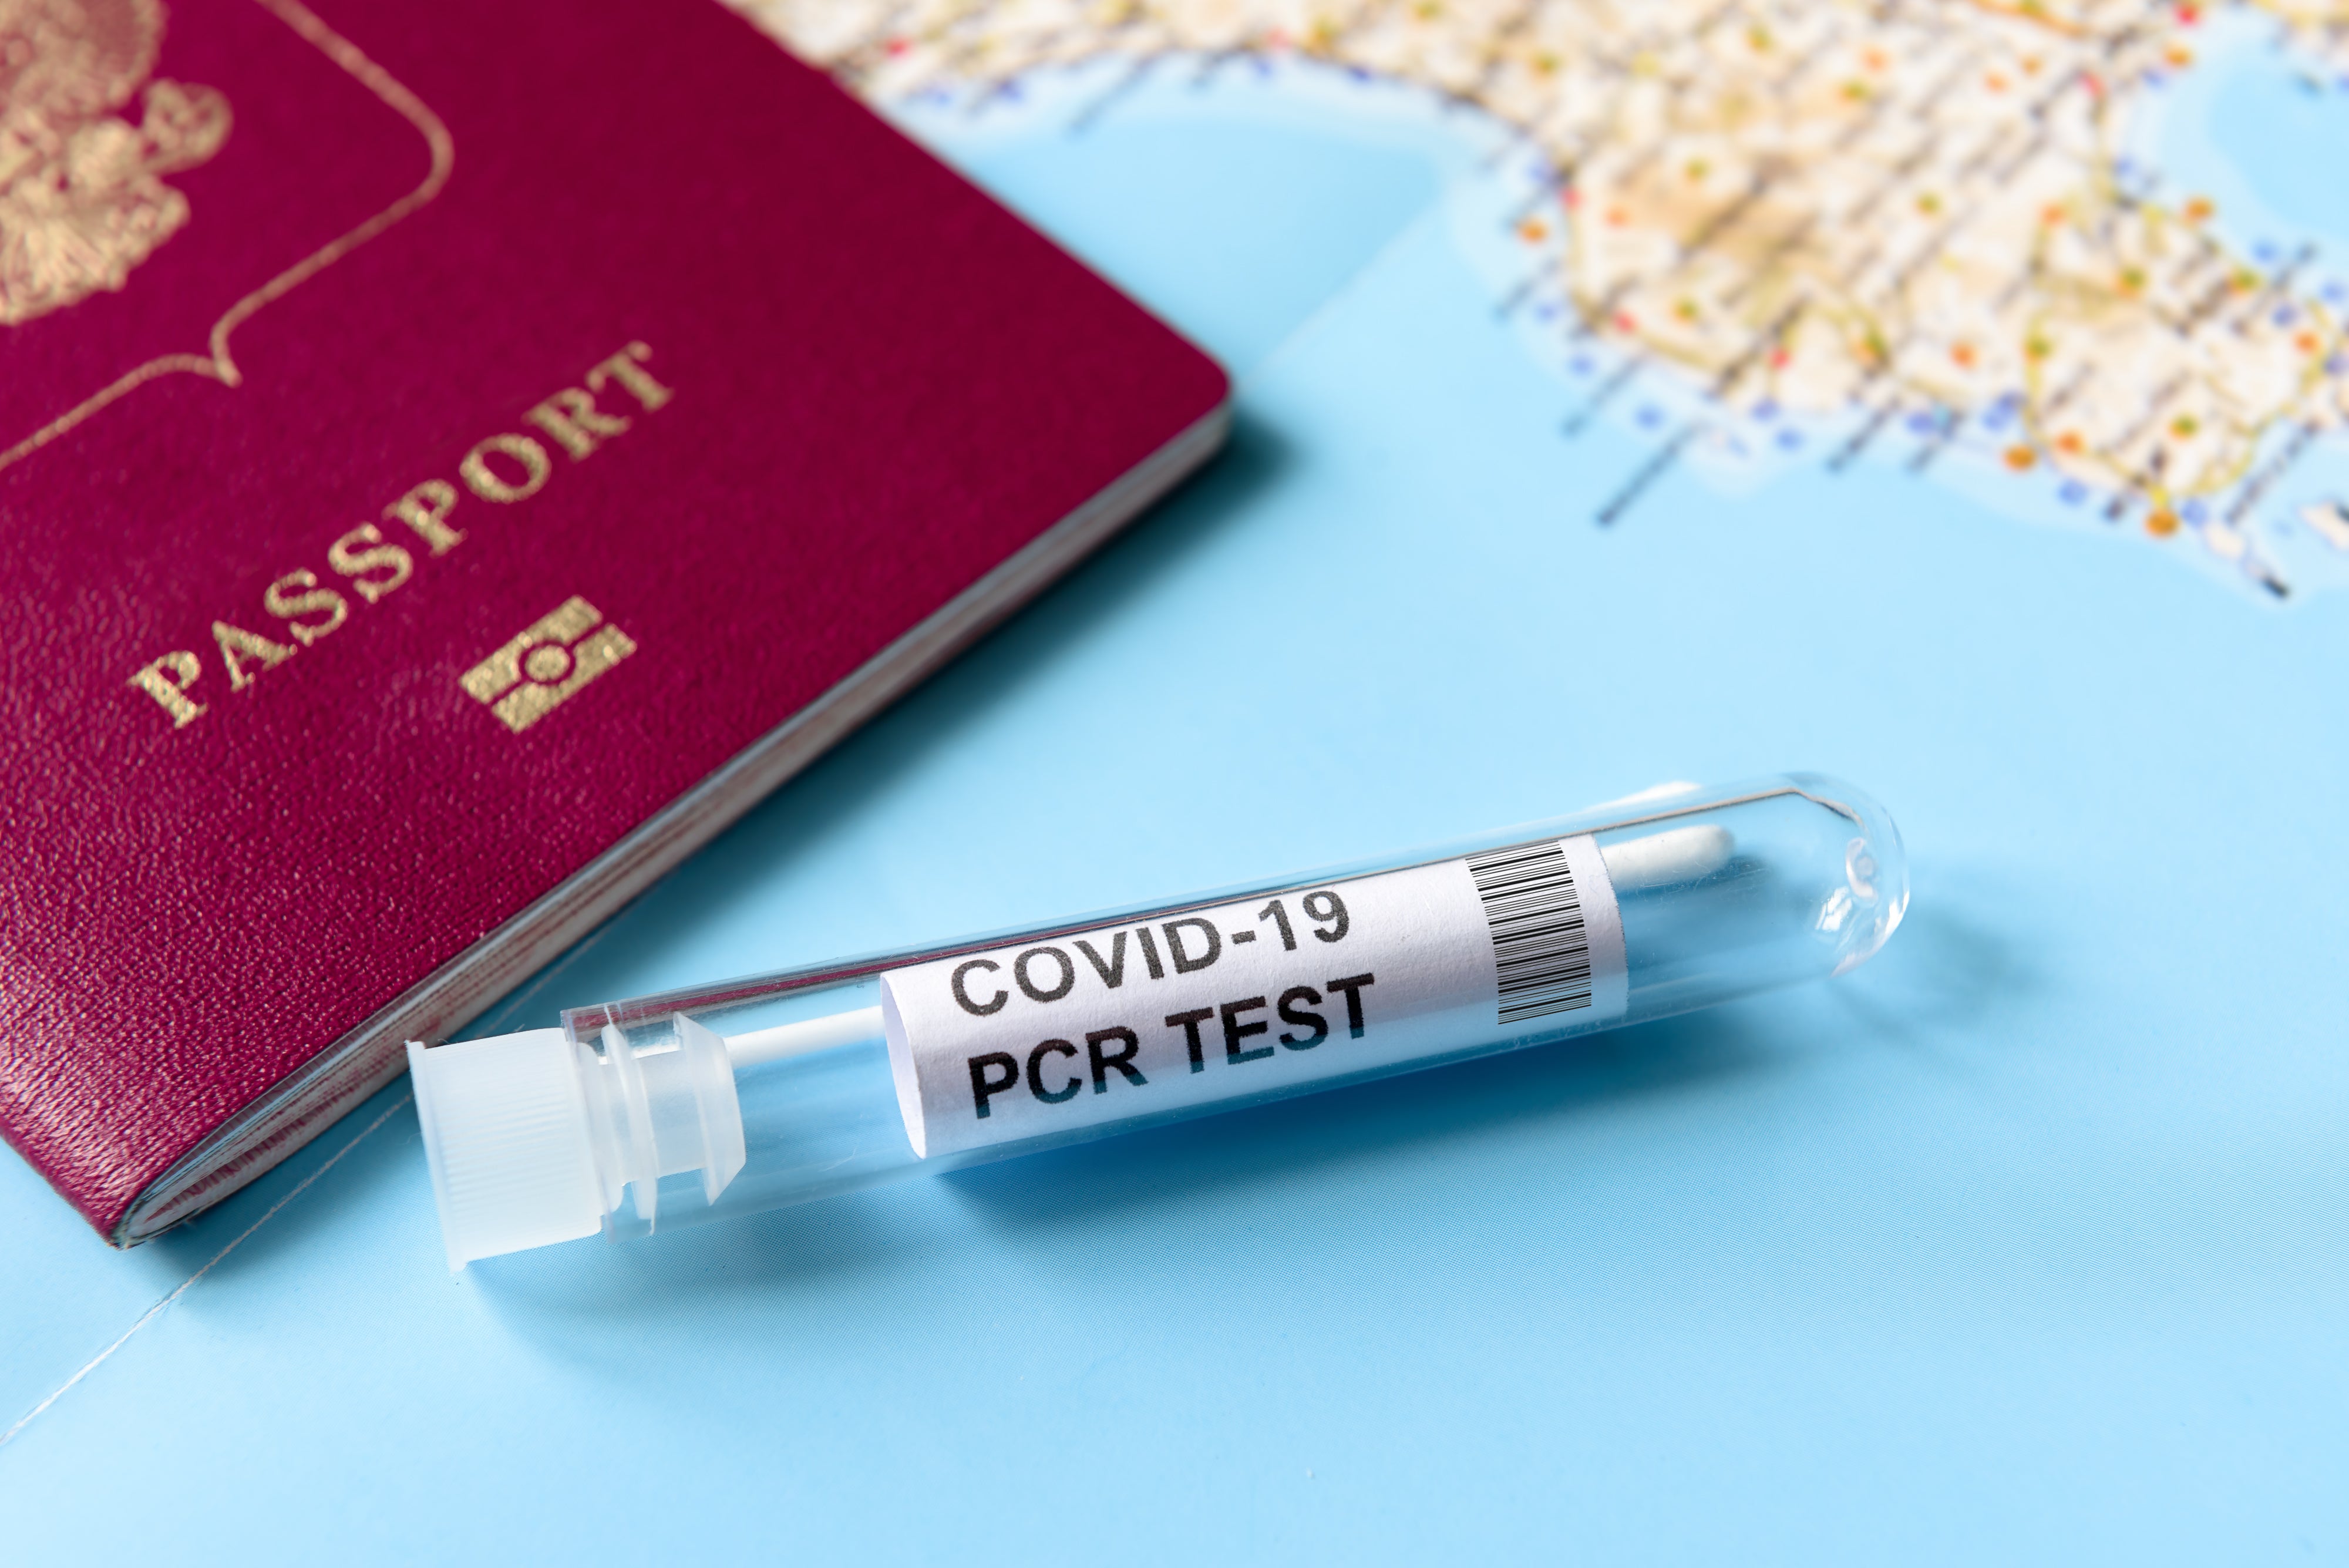 Travel industry leaders are calling for the UK government to cover the costs of PCR tests